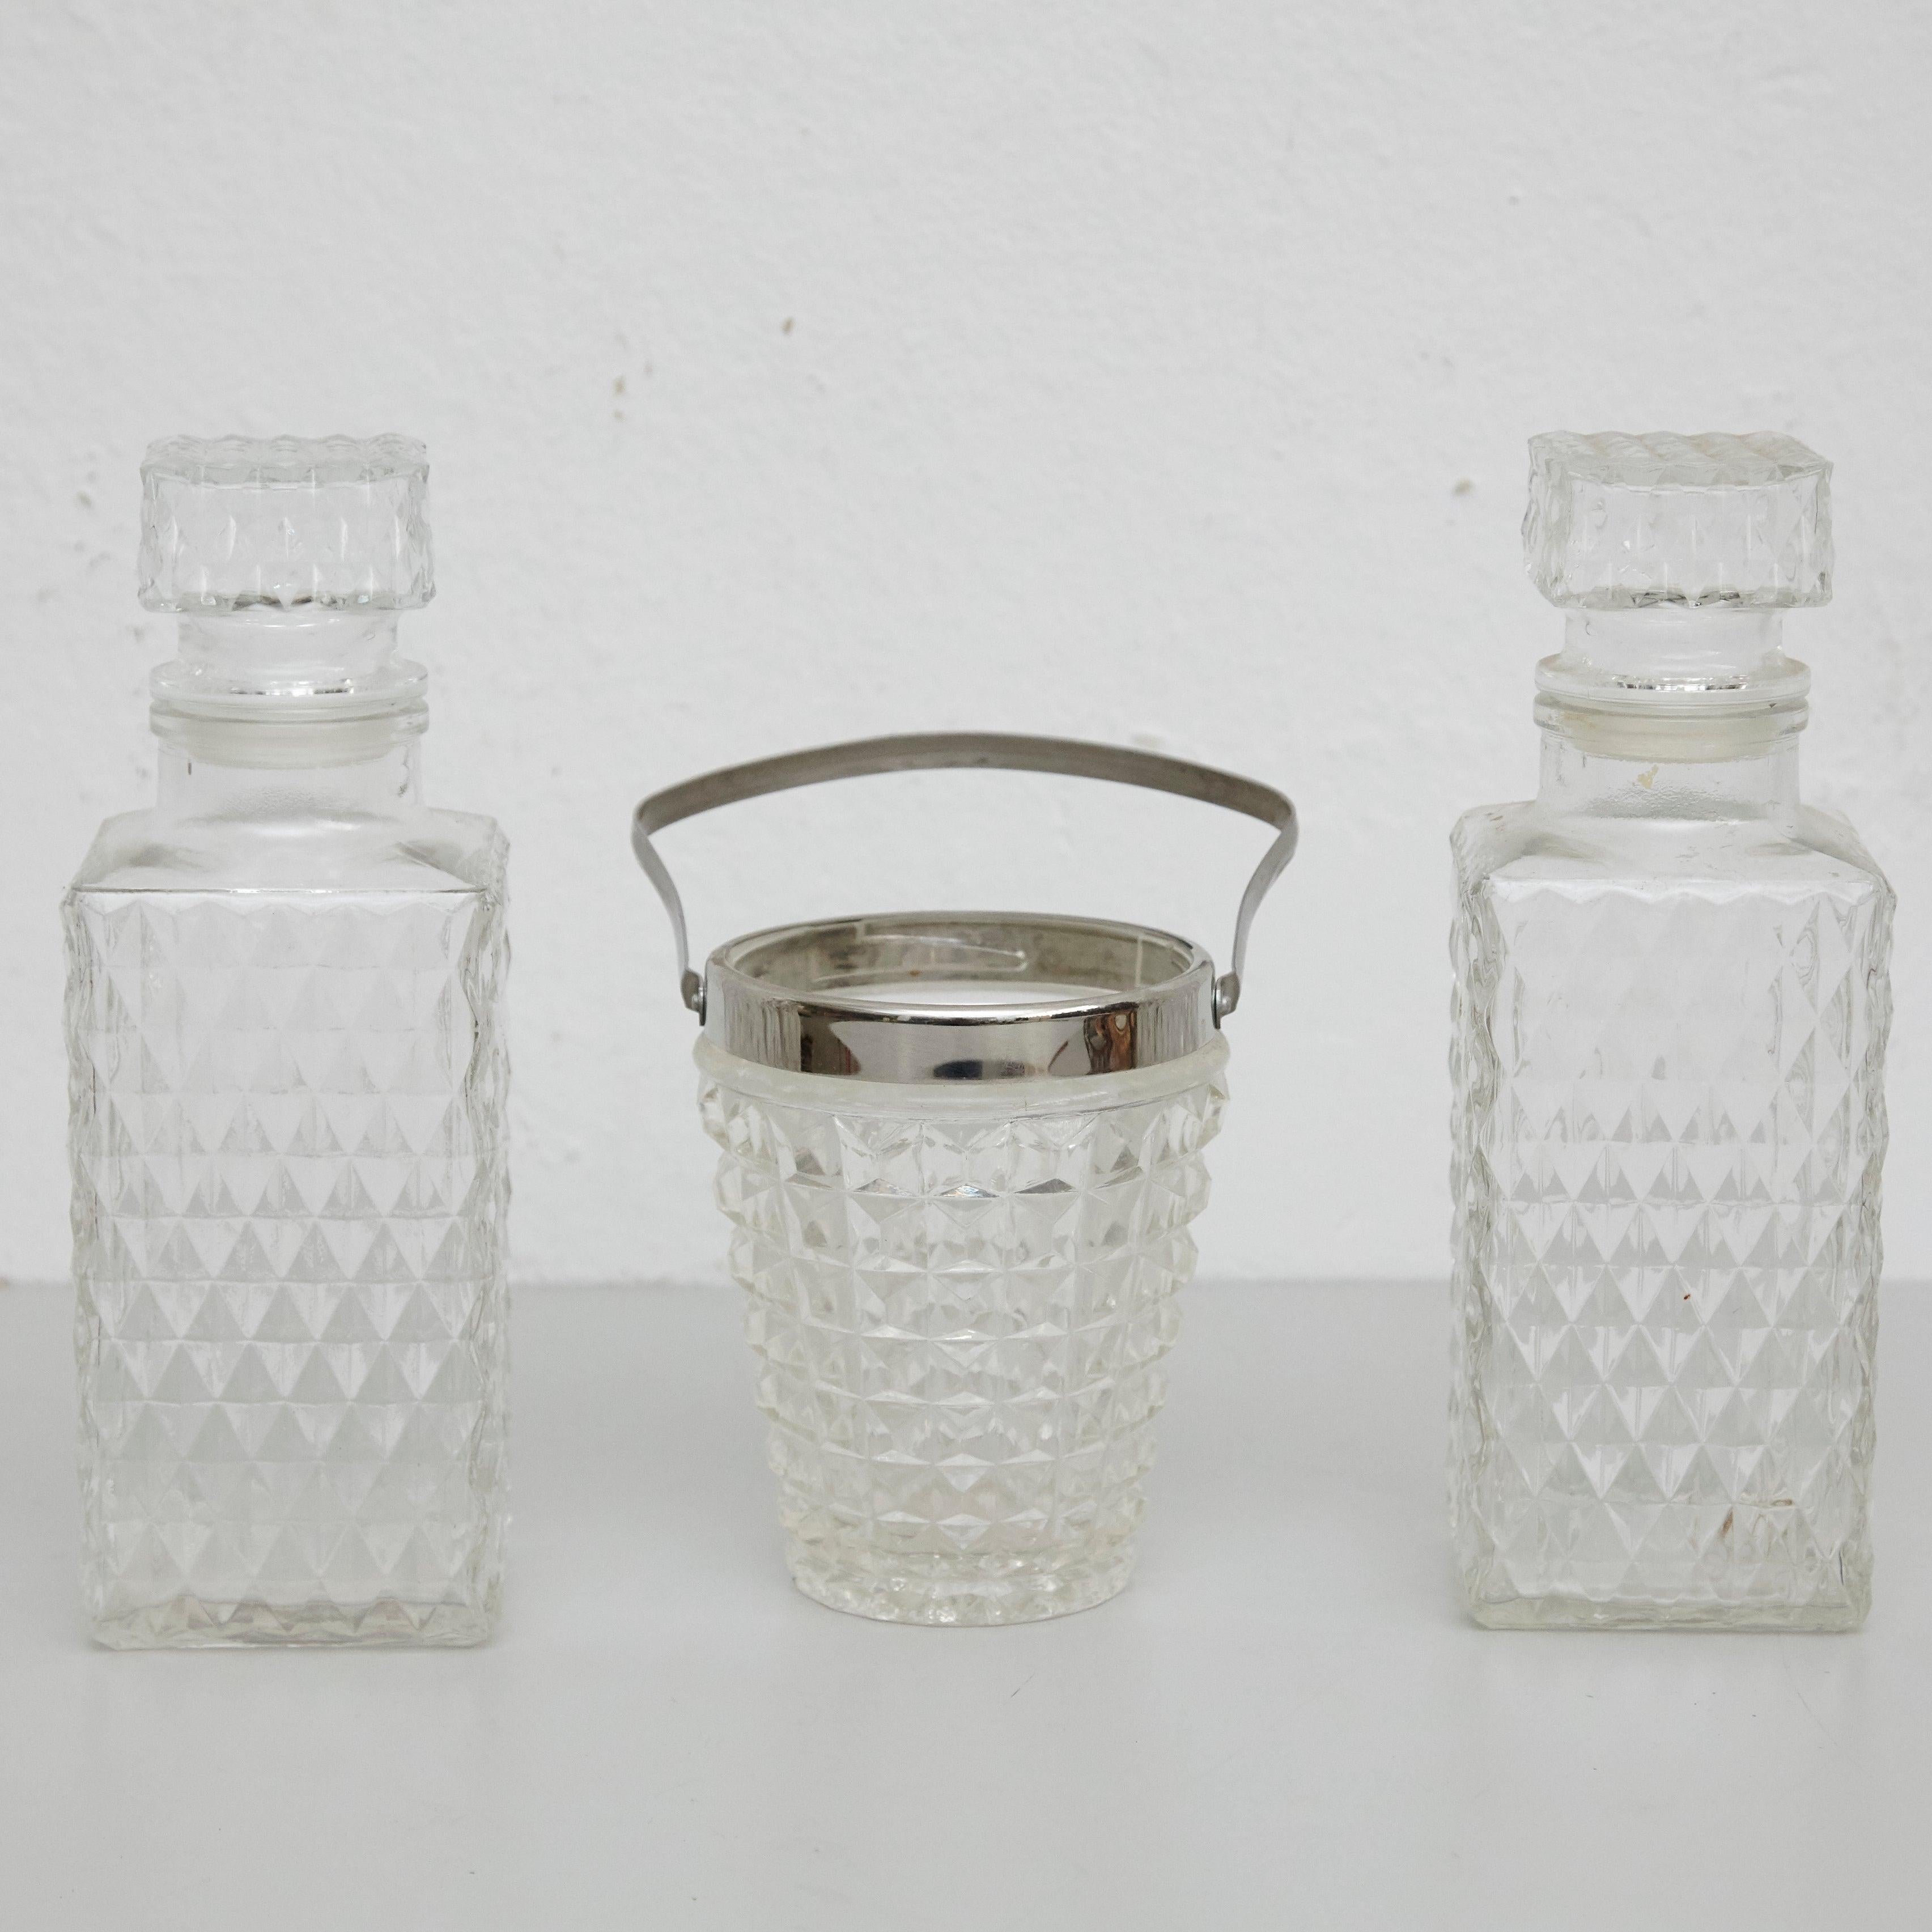 Set of Glass Whisky Bottles and ice bucket with faceted block crystal design. 
By unknown manufacturer, Spain, circa 1950.

In original condition, with minor wear consistent with age and use, preserving a beautiful